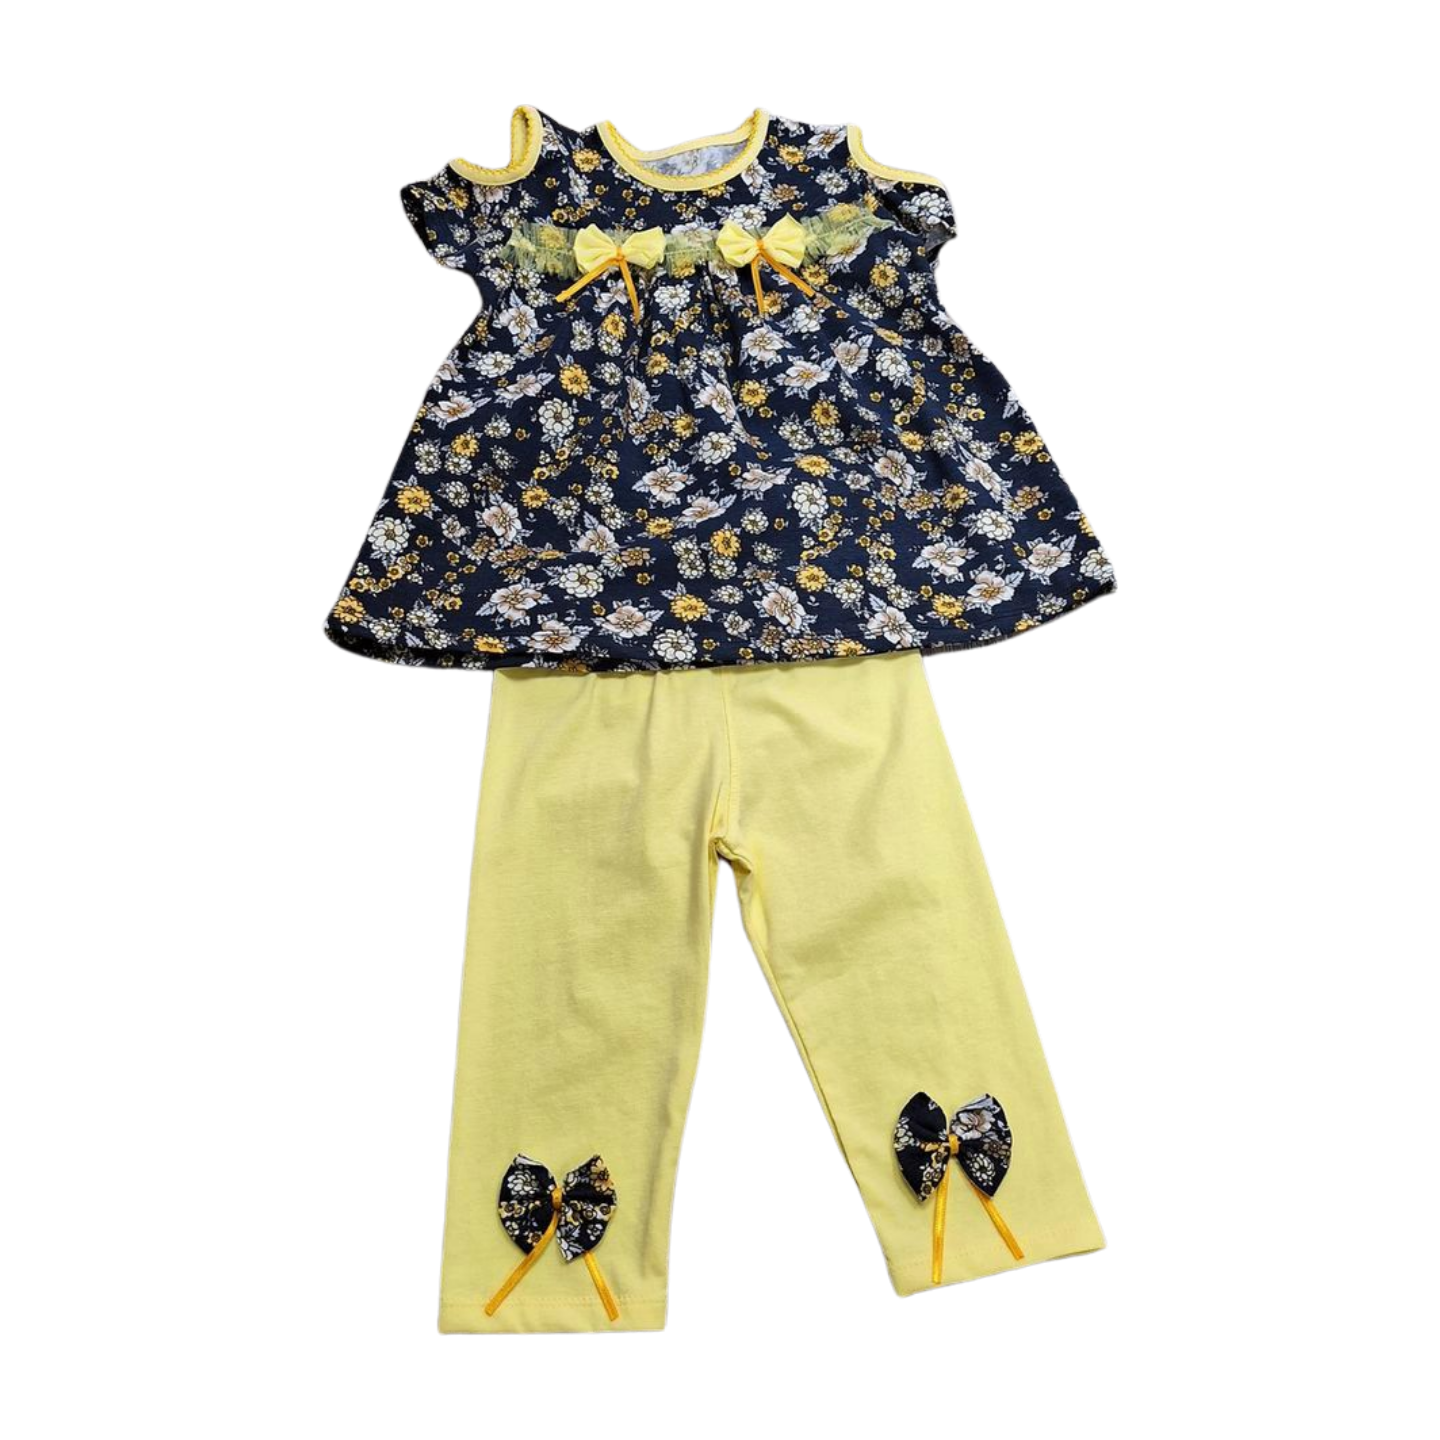 Rosy Ruffles Floral Top and Trousers Set 1 to 3 years